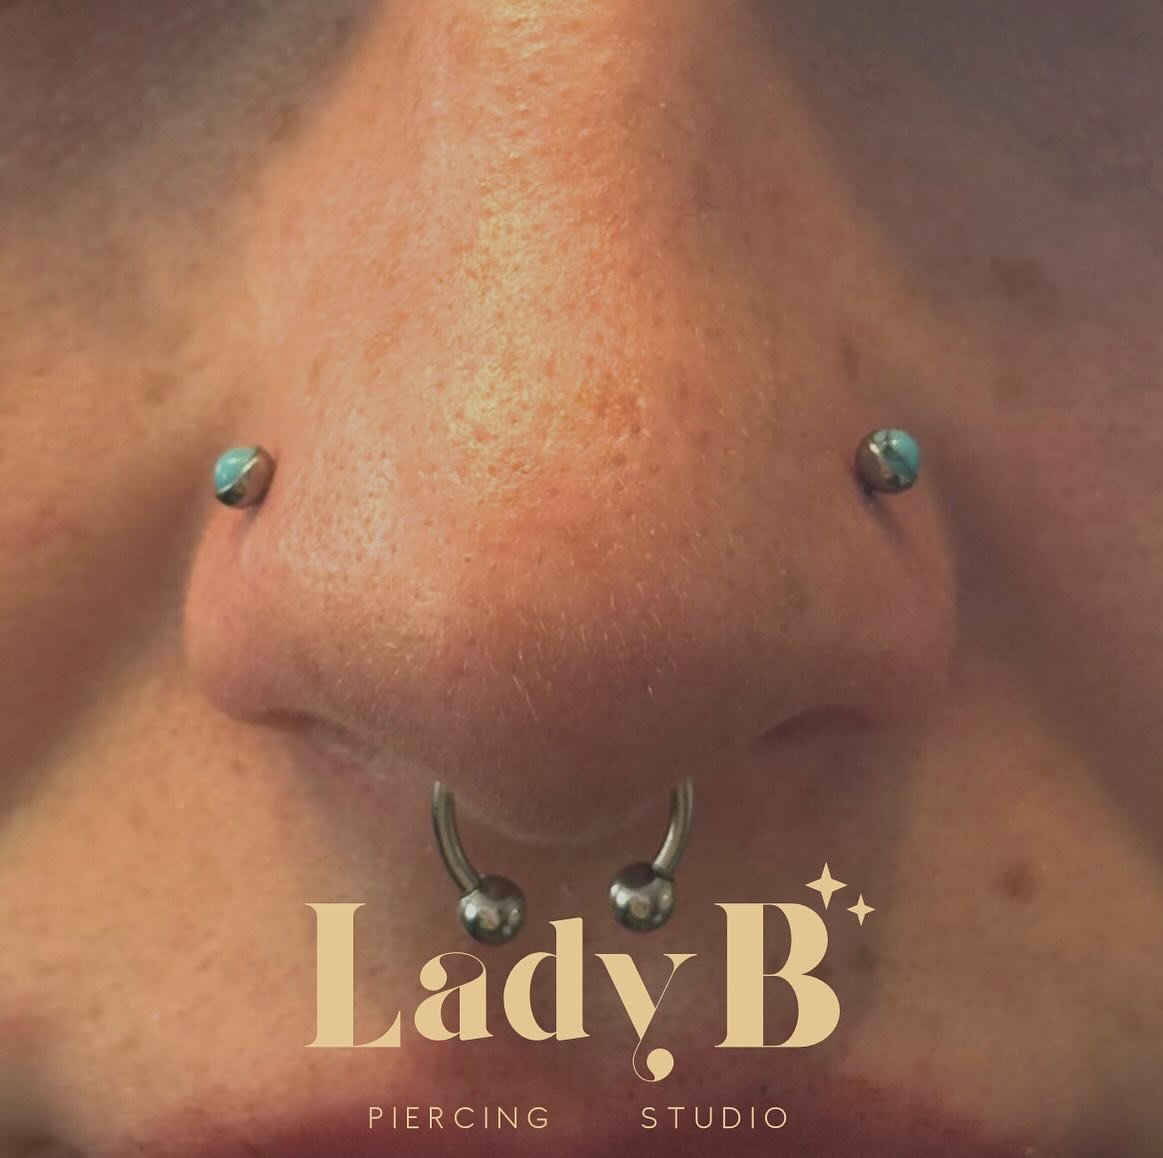 Double nostrils using the cutest little turquoise nose studs 💎🤍
Piercings done by Erin at @ladybpiercings